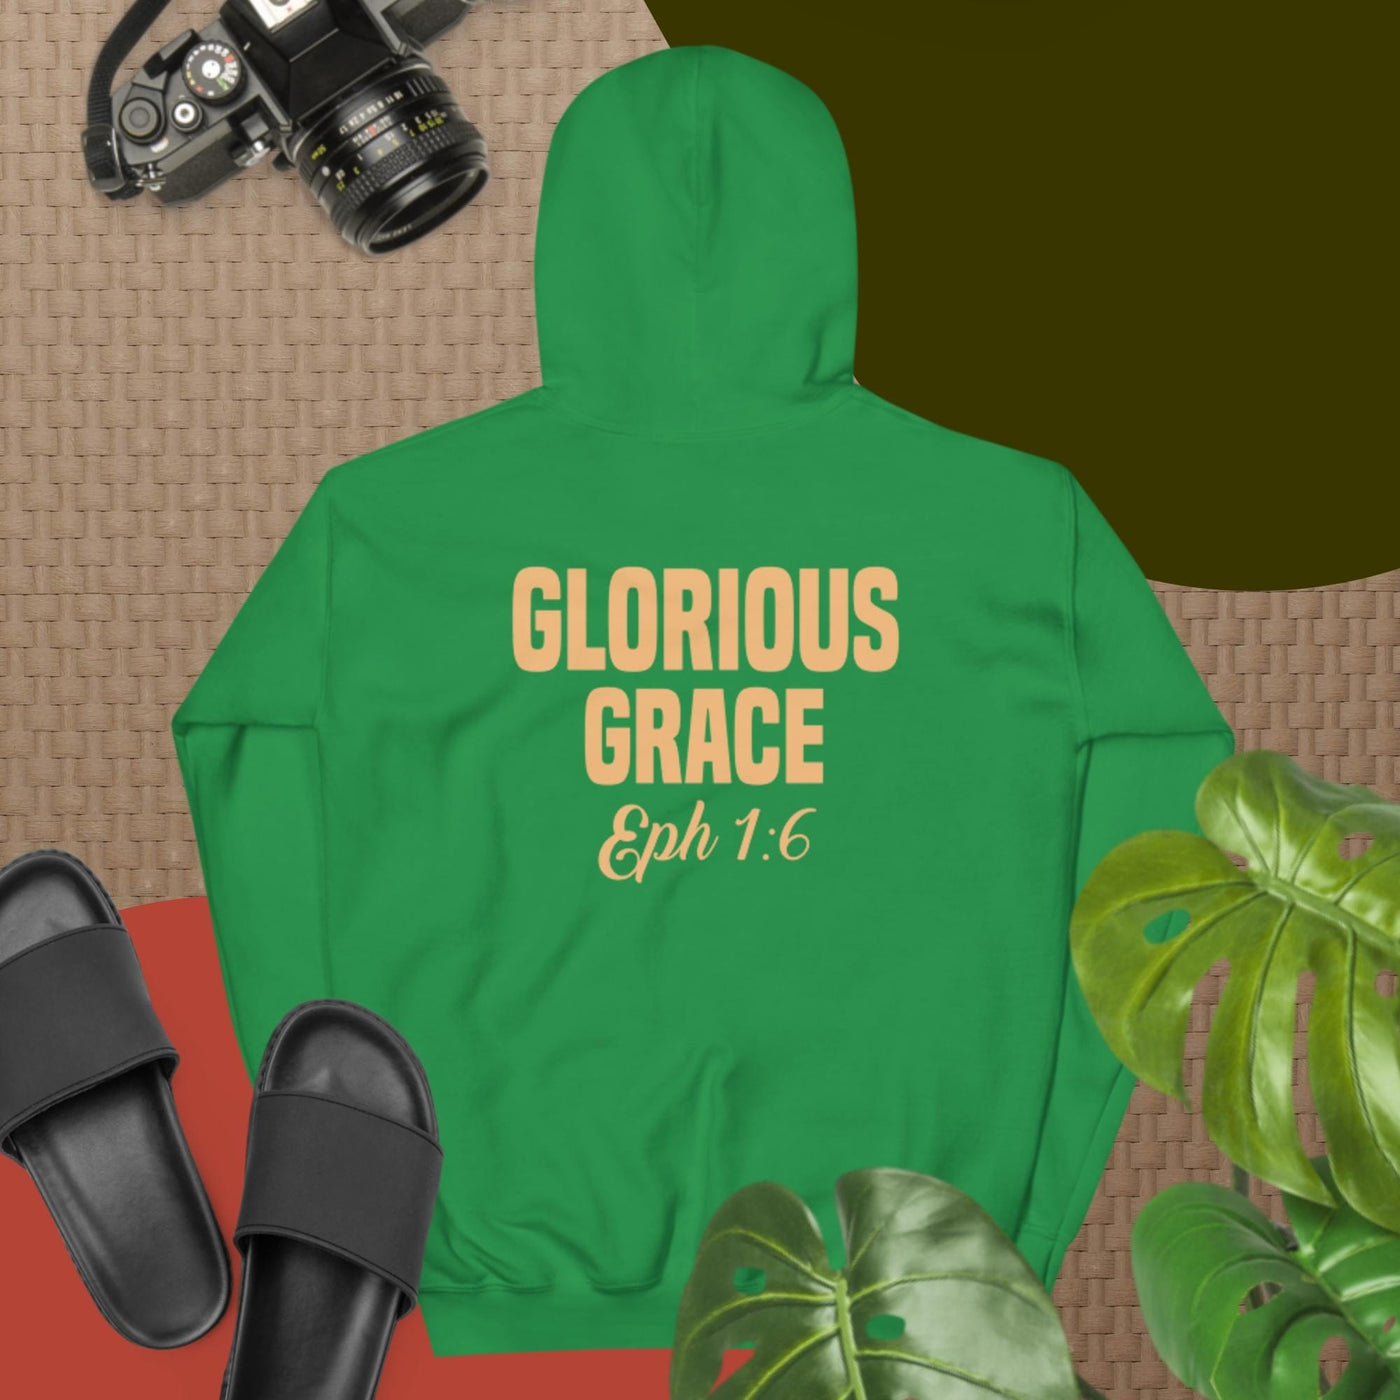 Christian Glorious Grace two sided Women's Hoodie